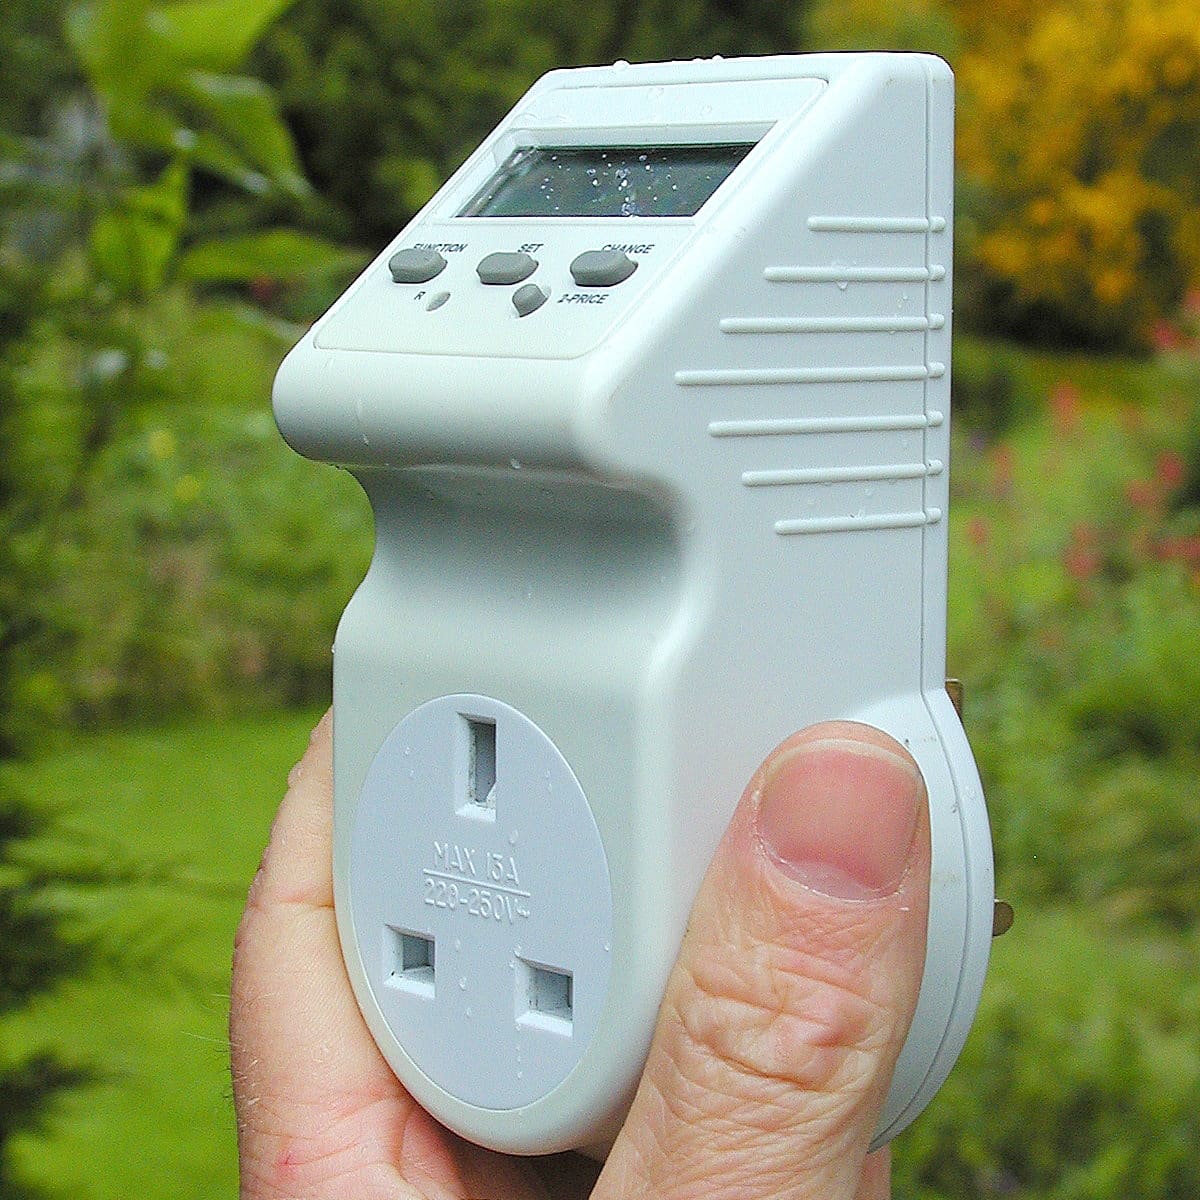 Electric Power Consumption Meter Measures Energy Use & Cost of Running Appliance 